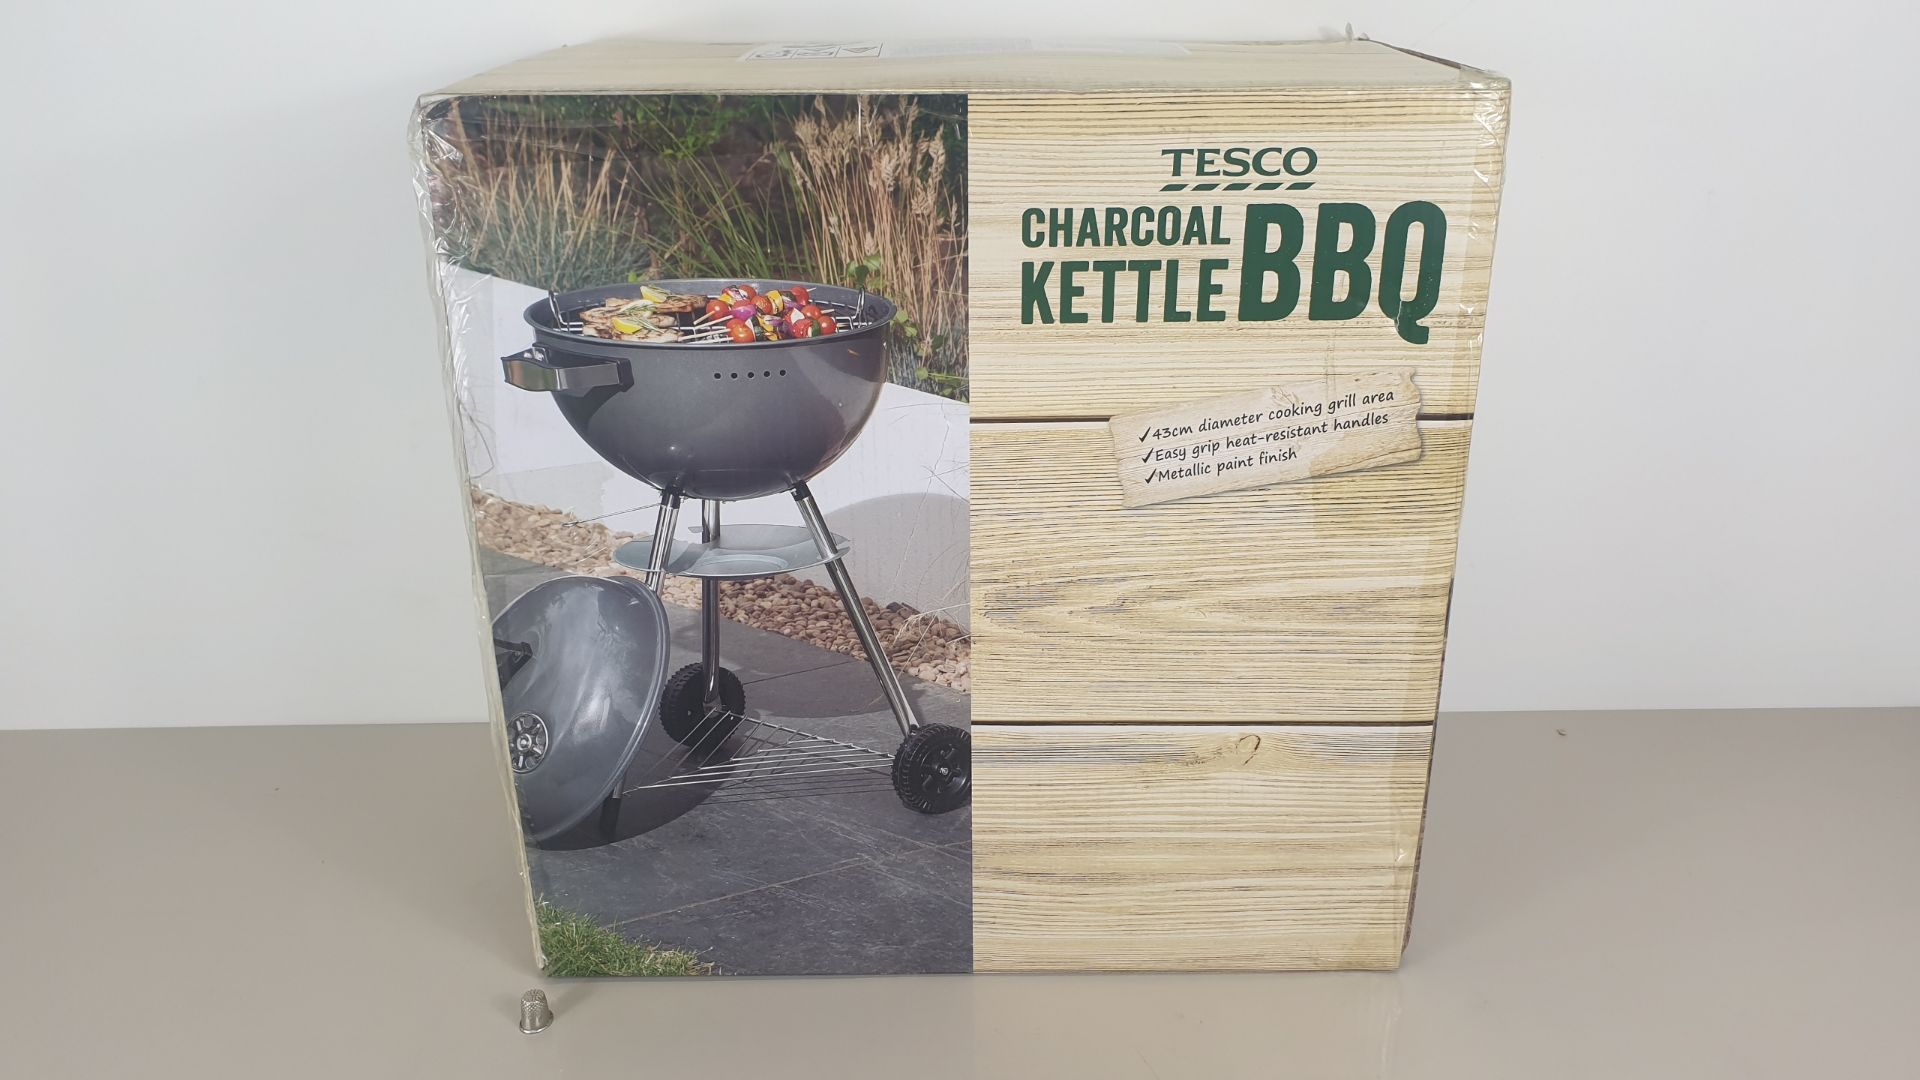 3 X BRAND NEW TESCO CHARCOAL BBQS - 43CM DIA WITH EASY GRIP HEAT RESISTANT HANDLES (NOTE BOXES